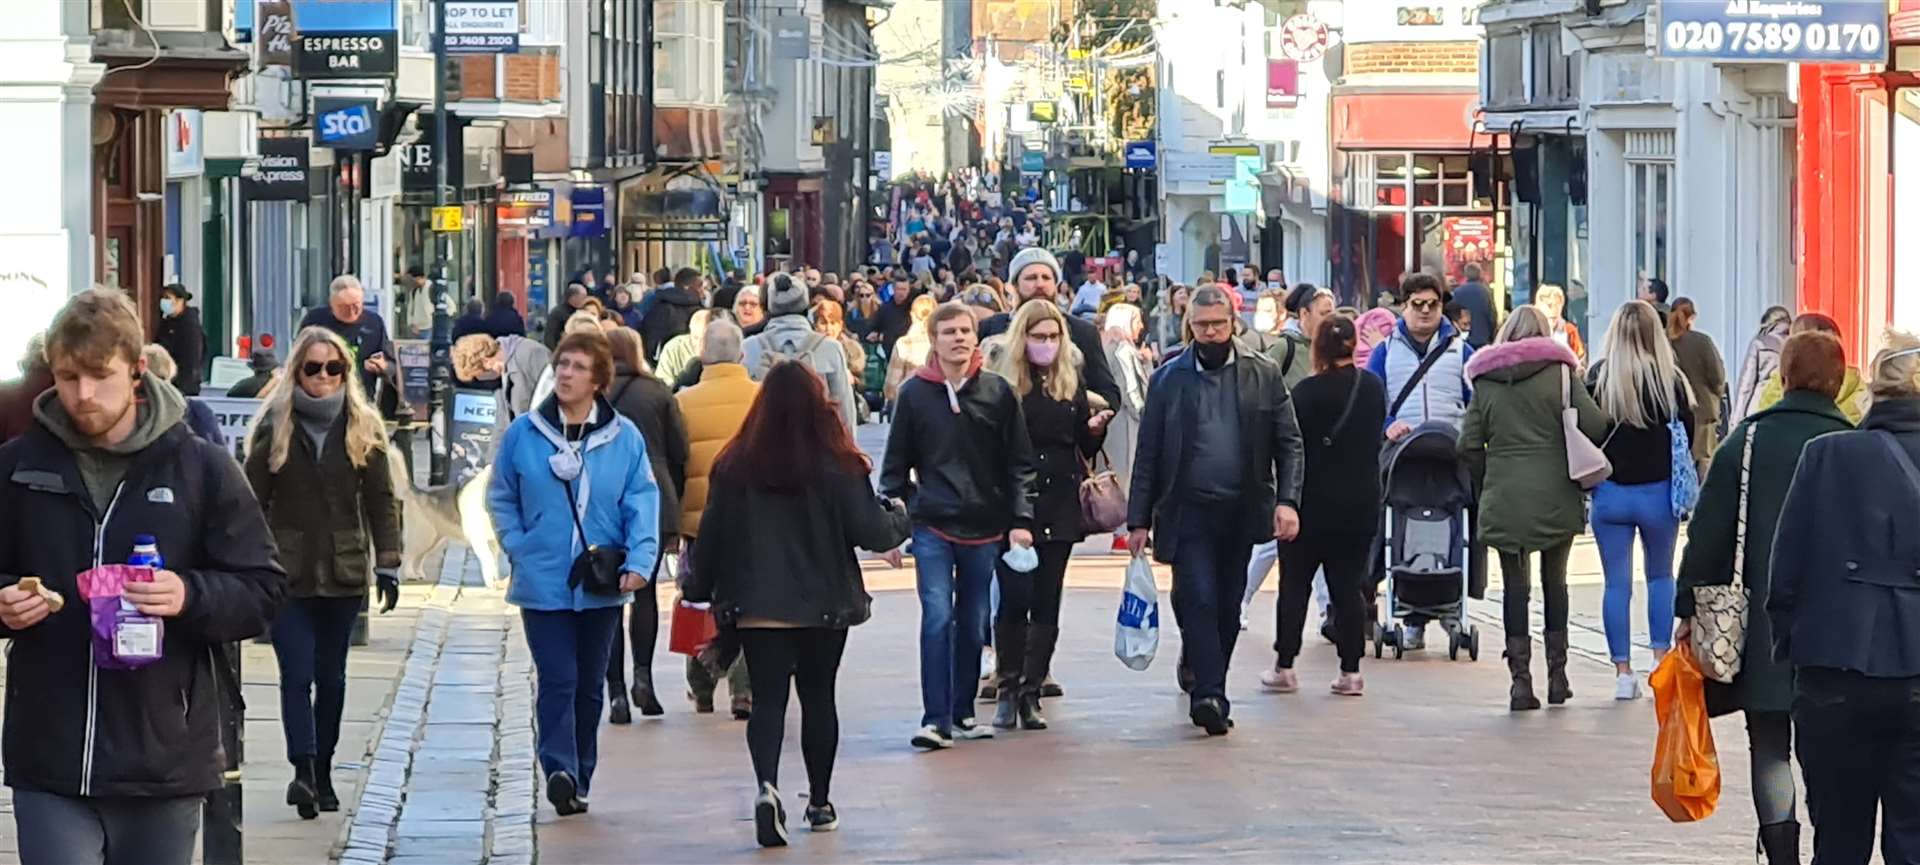 Just how will our high streets look in another 10-20 years?